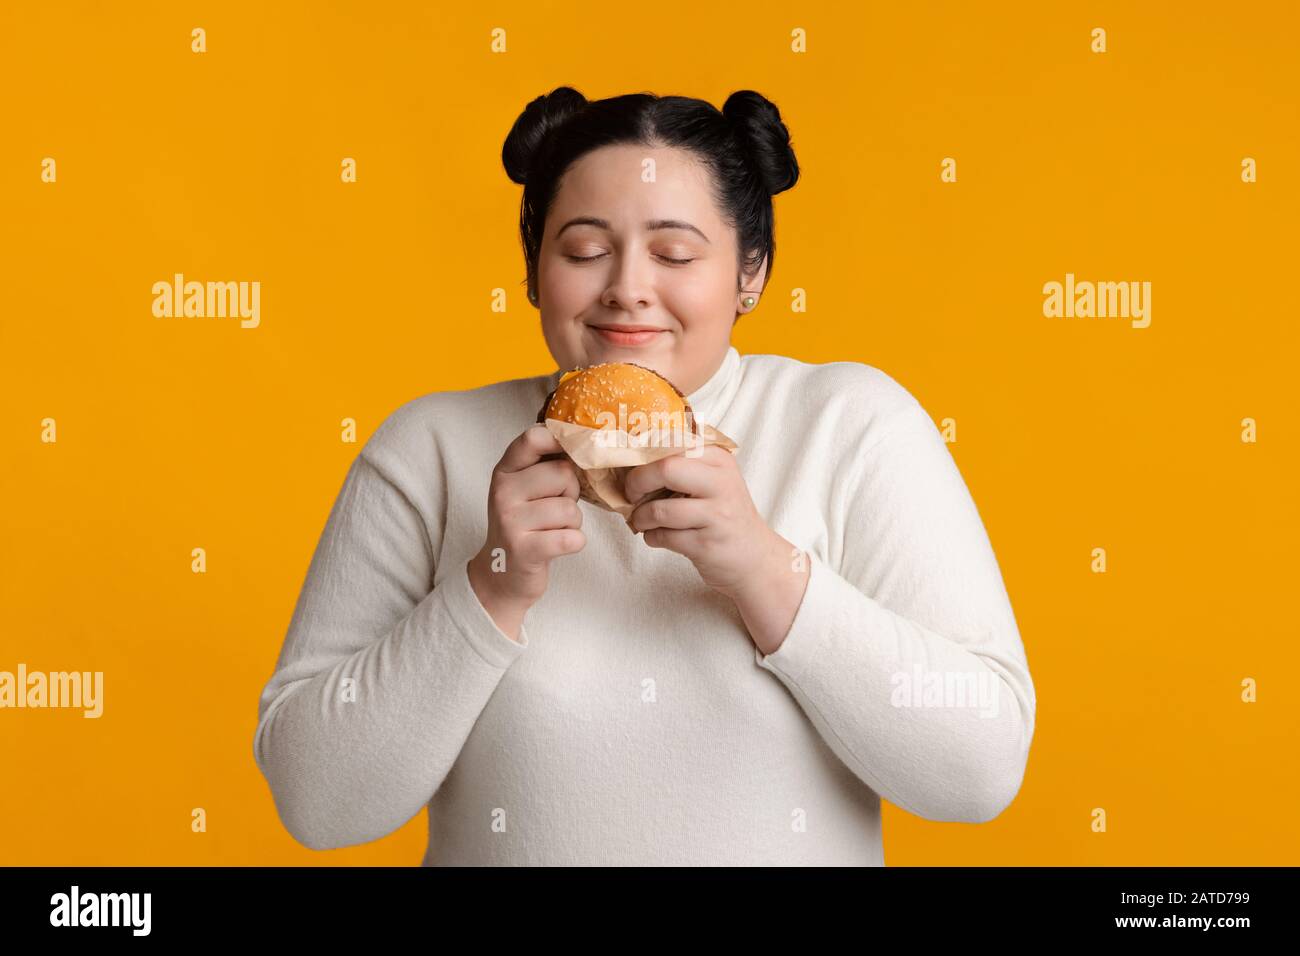 Plump Hungry Girl Holding Burger In Hands And Sniffing It Stock Photo